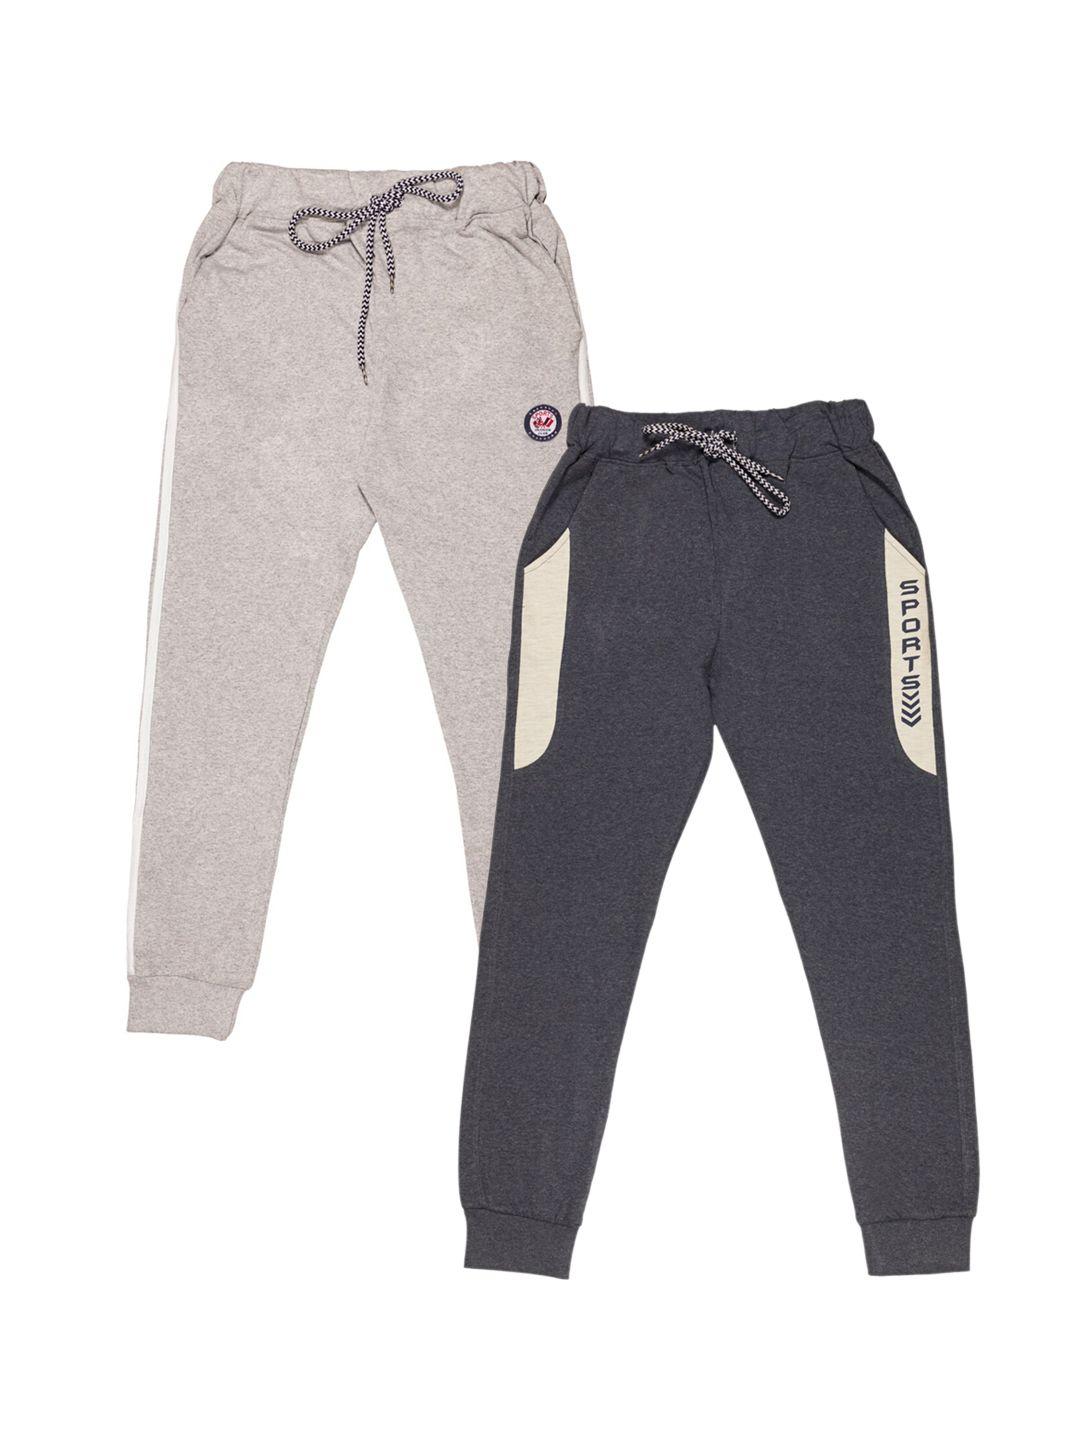 todd n teen boys grey & blue pack of 2 cotton joggers